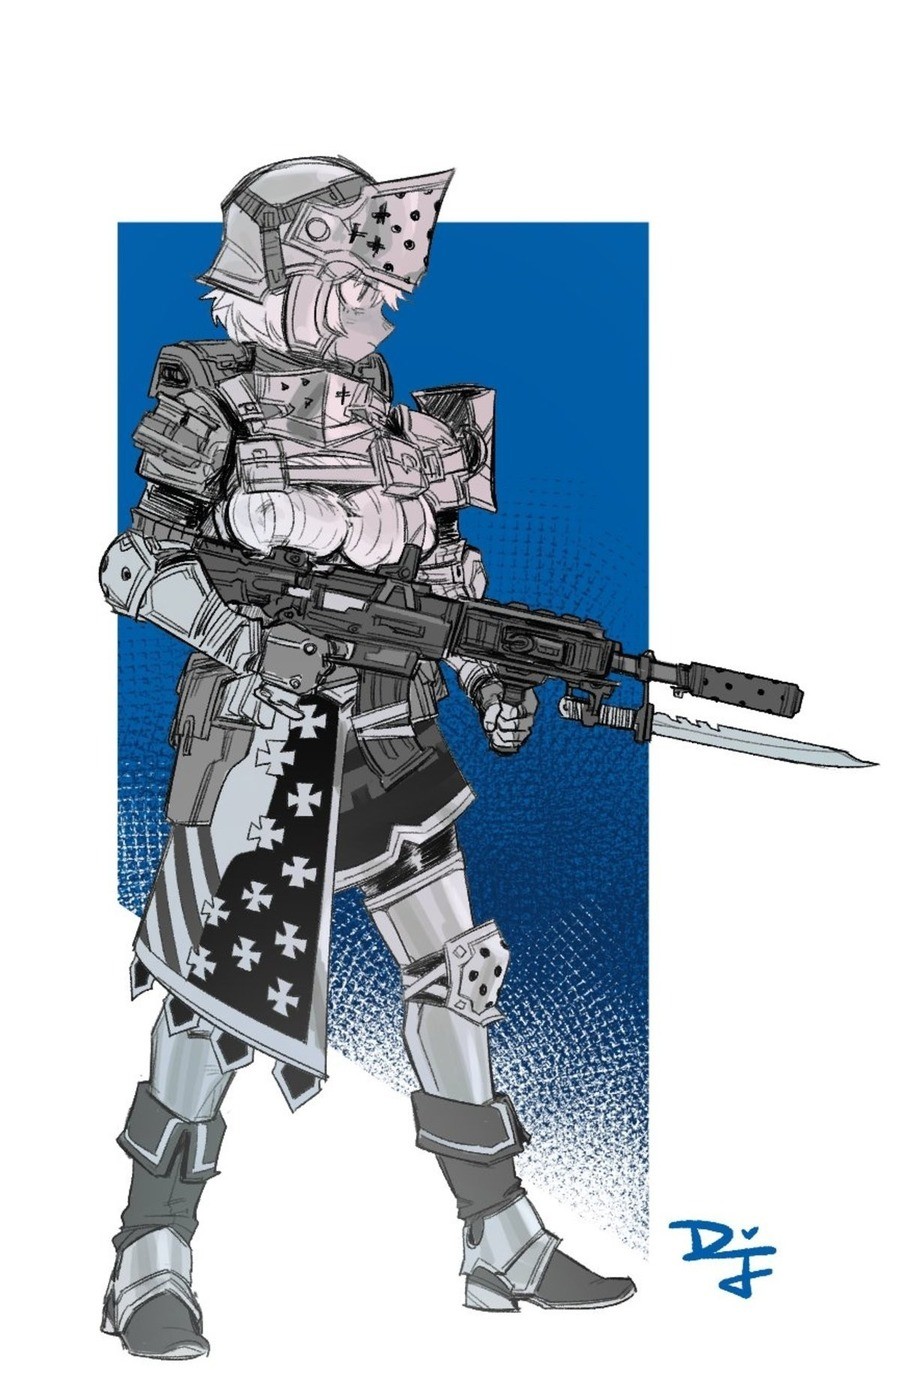 if we still employed kht designs in soldiers. .. I always aim for the un-canned tits. or the knee..